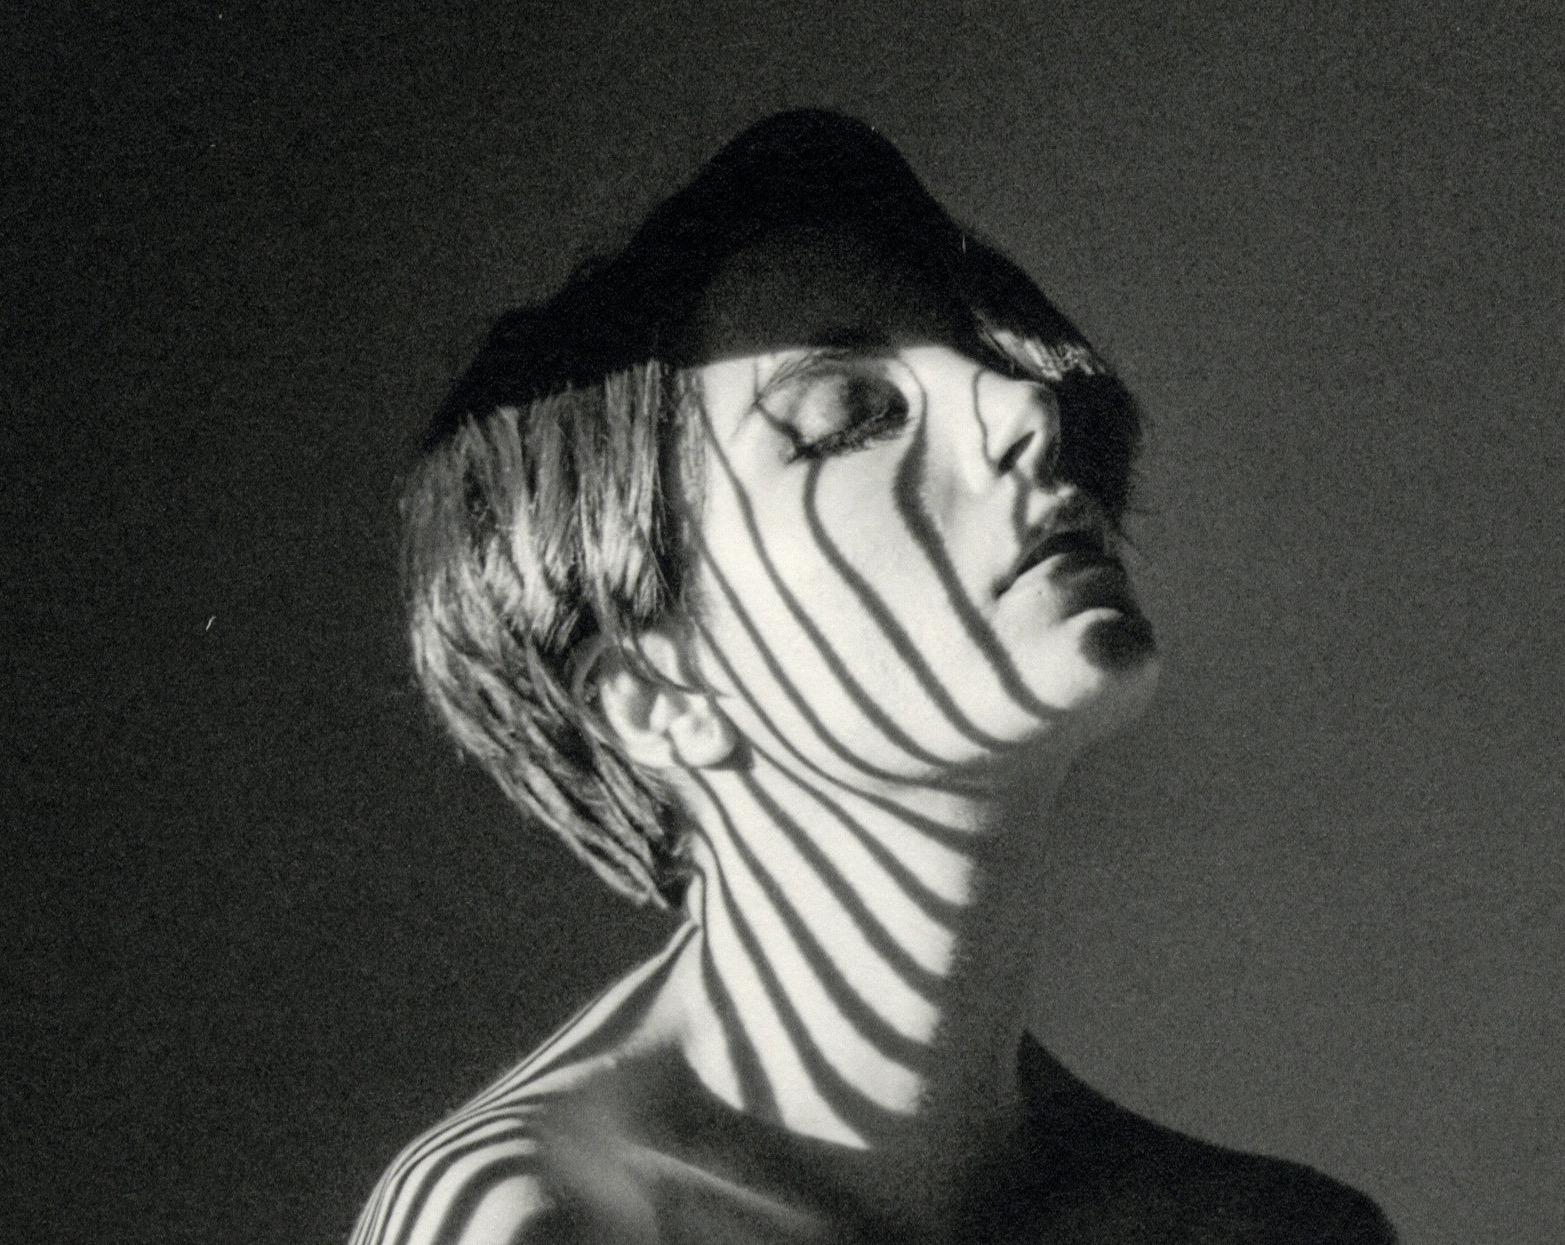 Roarie IV (Nude in Shadows) - Photograph by Laurence Winram